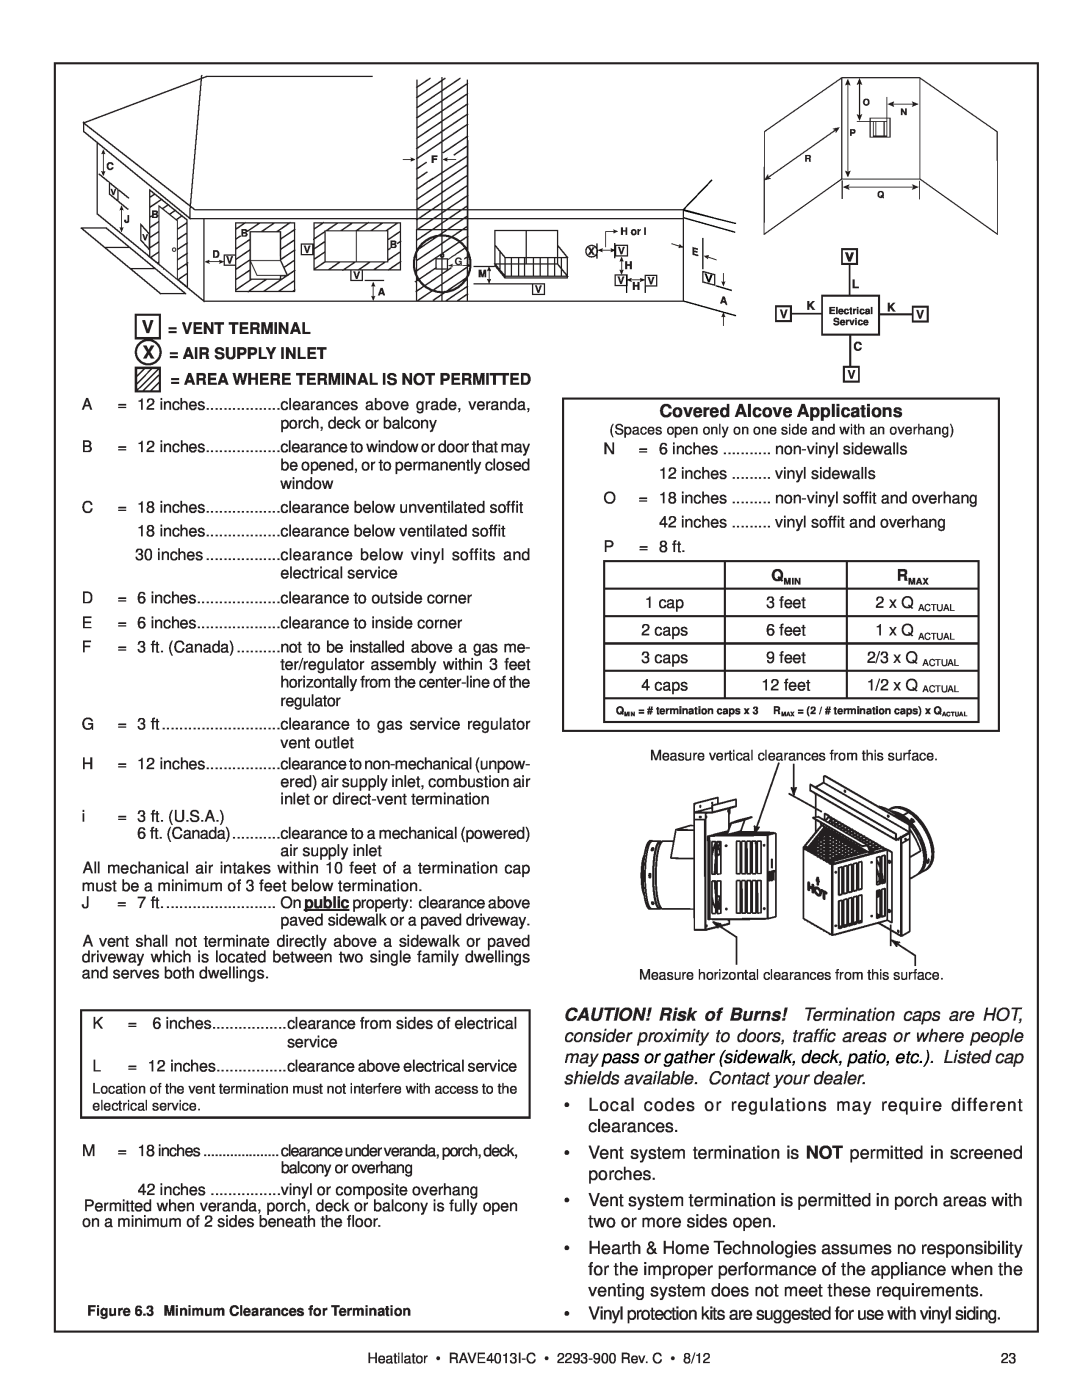 Heatiator Rave4013i-c owner manual Covered Alcove Applications, V= Vent Terminal X = Air Supply Inlet 